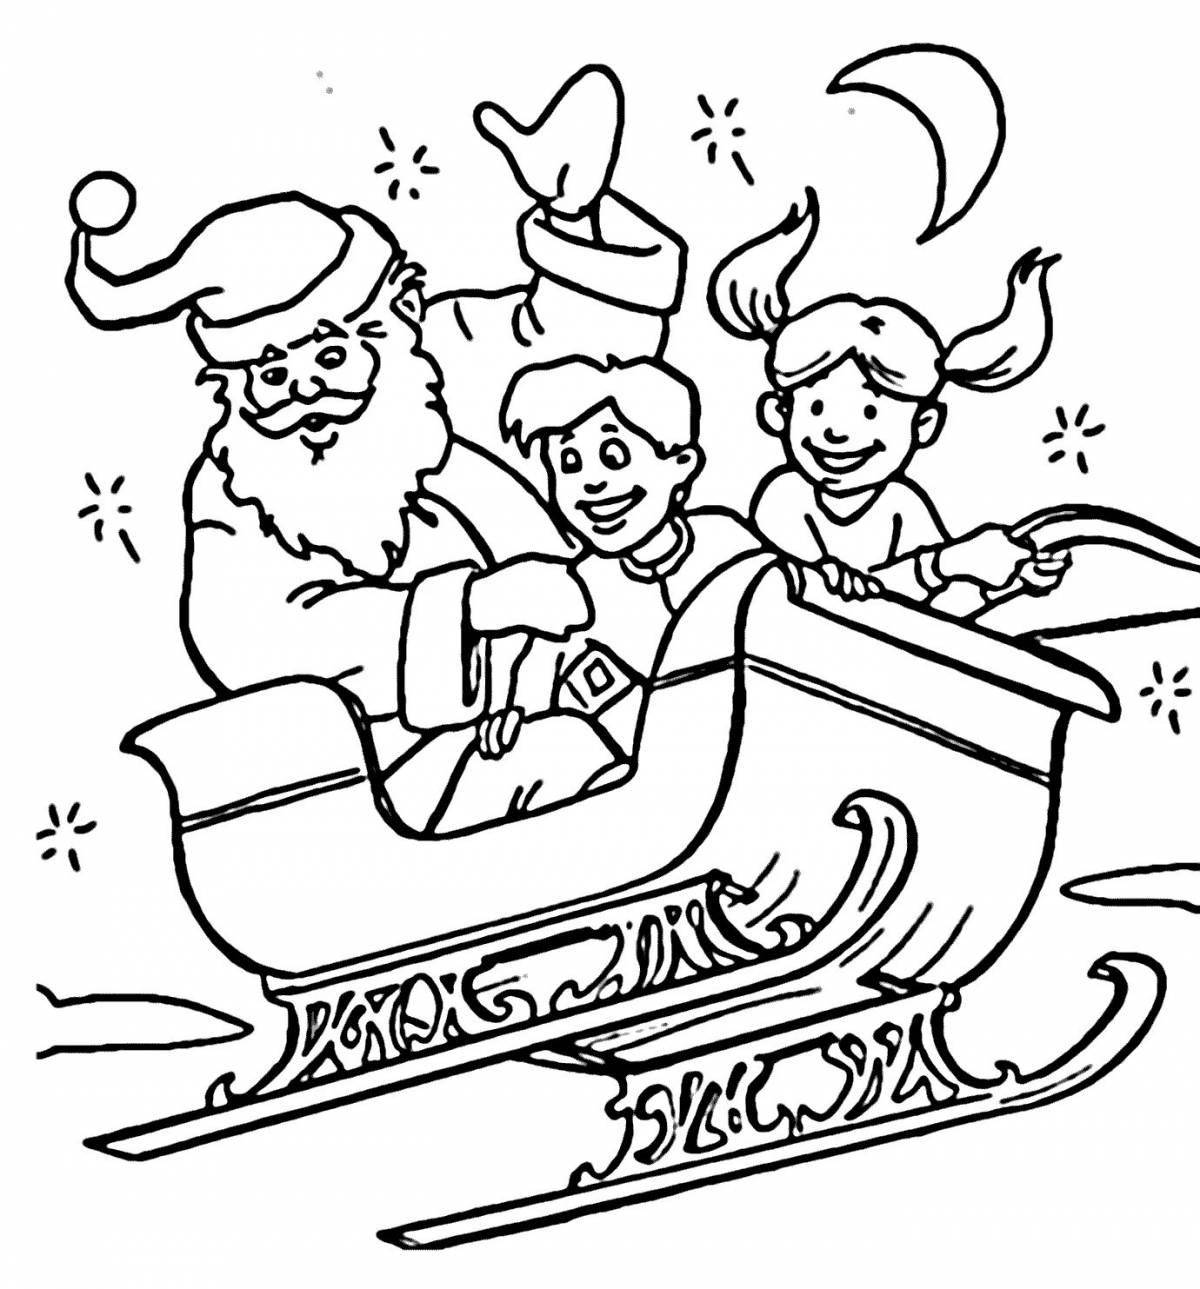 Glorious sleigh coloring for children